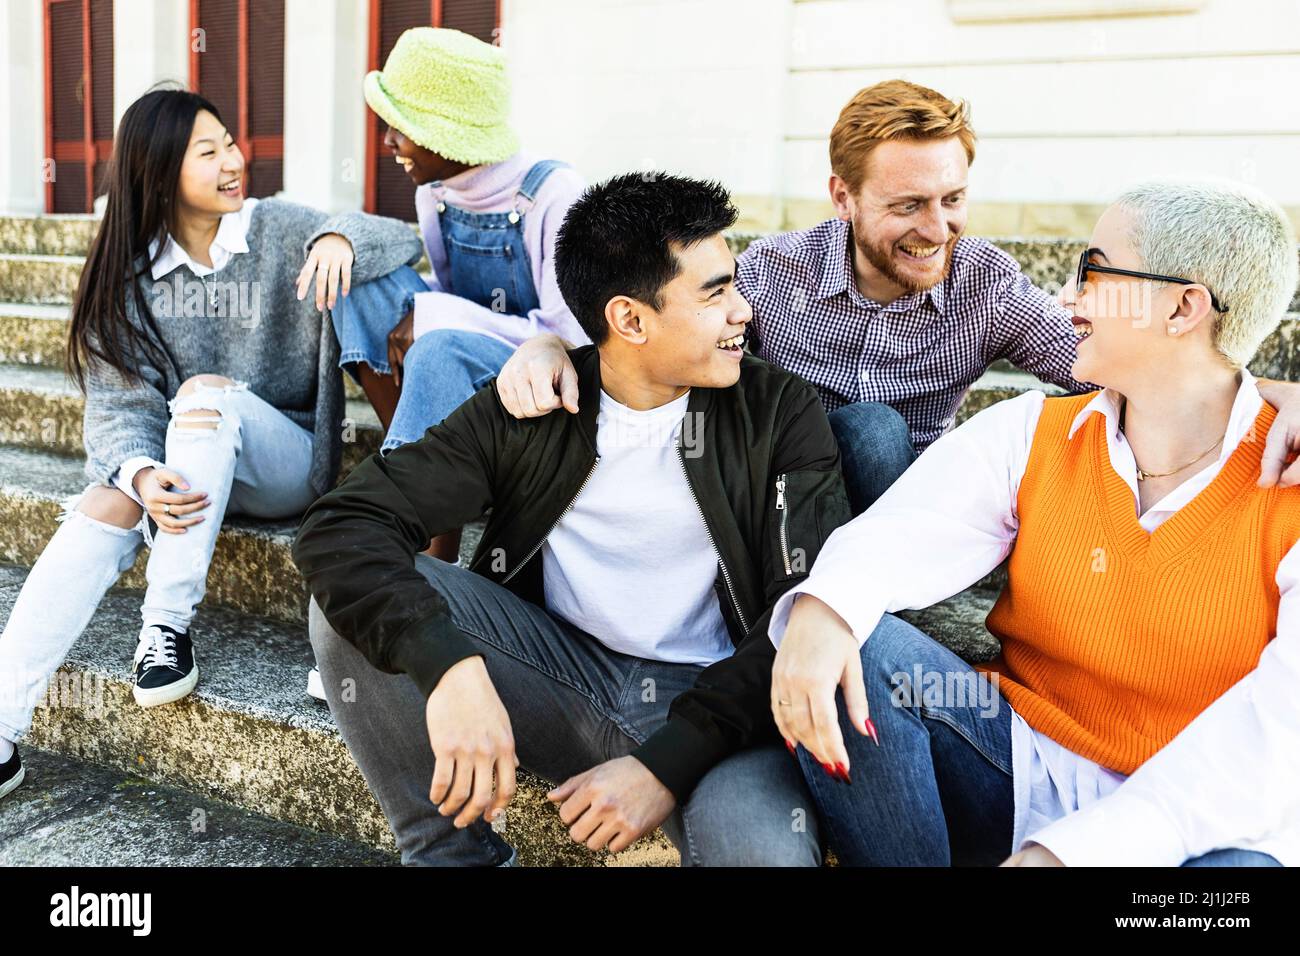 Trendy diverse millennial students laughing out loud and having fun together Stock Photo